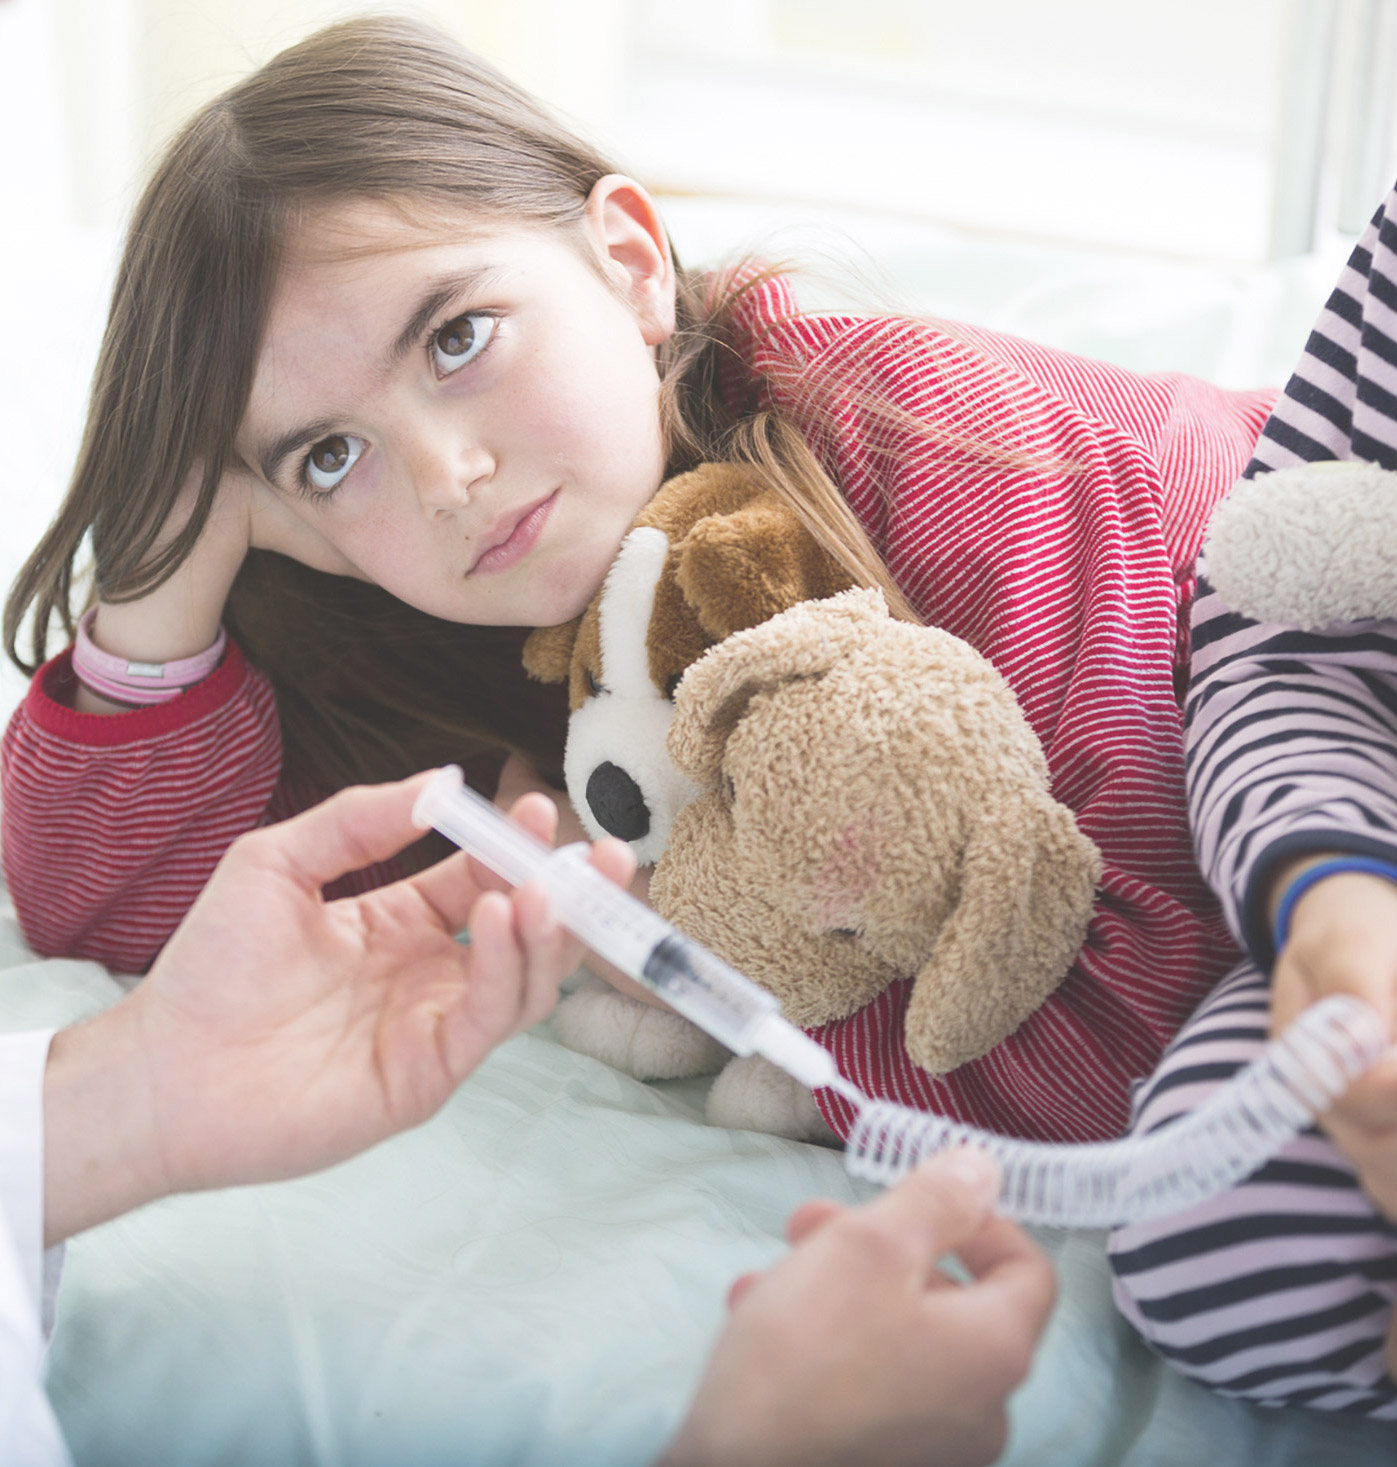 Child in hospital with teddy and syringe.